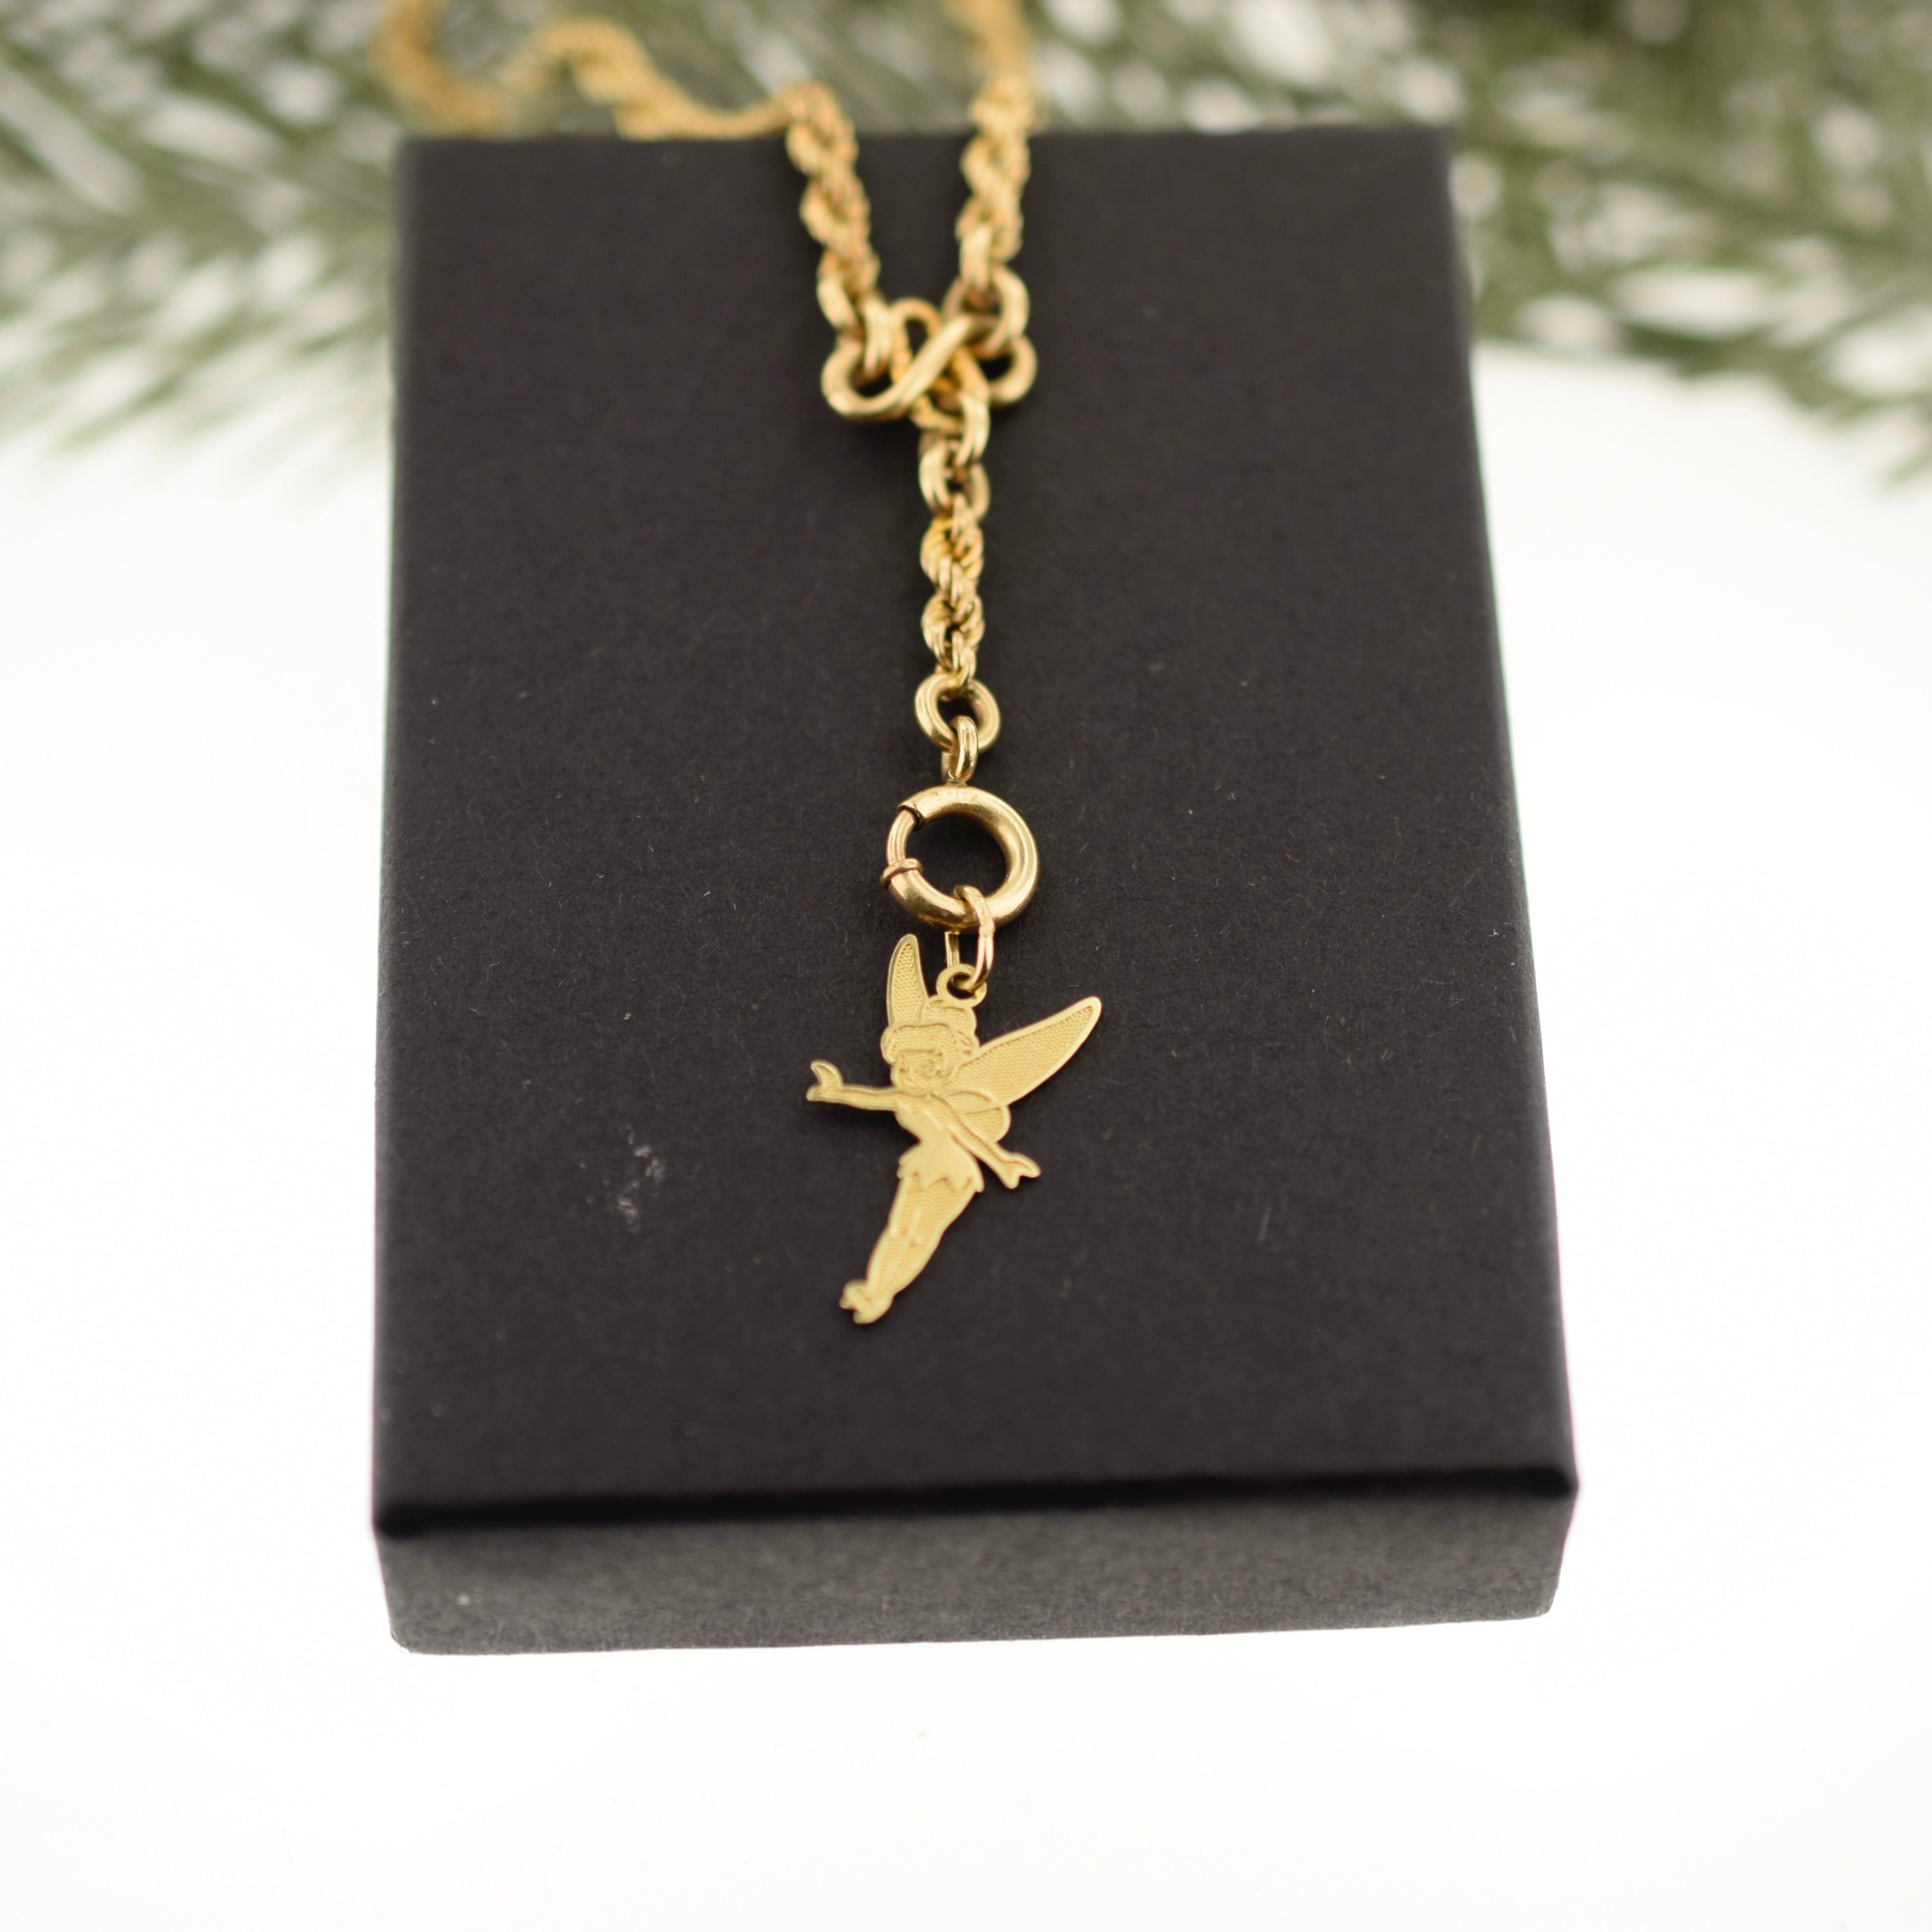 This 14k yellow gold Disney Tinkerbell charm is a great addition to any jewelry collection, as it is the perfect size for both a pendant and a charm bracelet. Its elegant design and quality material make it a desirable item for any fan of the beloved character.     Rutledge Exchange is a Boutique Jewelry and Antiques Business in Historic Downtown Camden SC. We source regionally from Estate Sales, Dealers and Private Sellers.